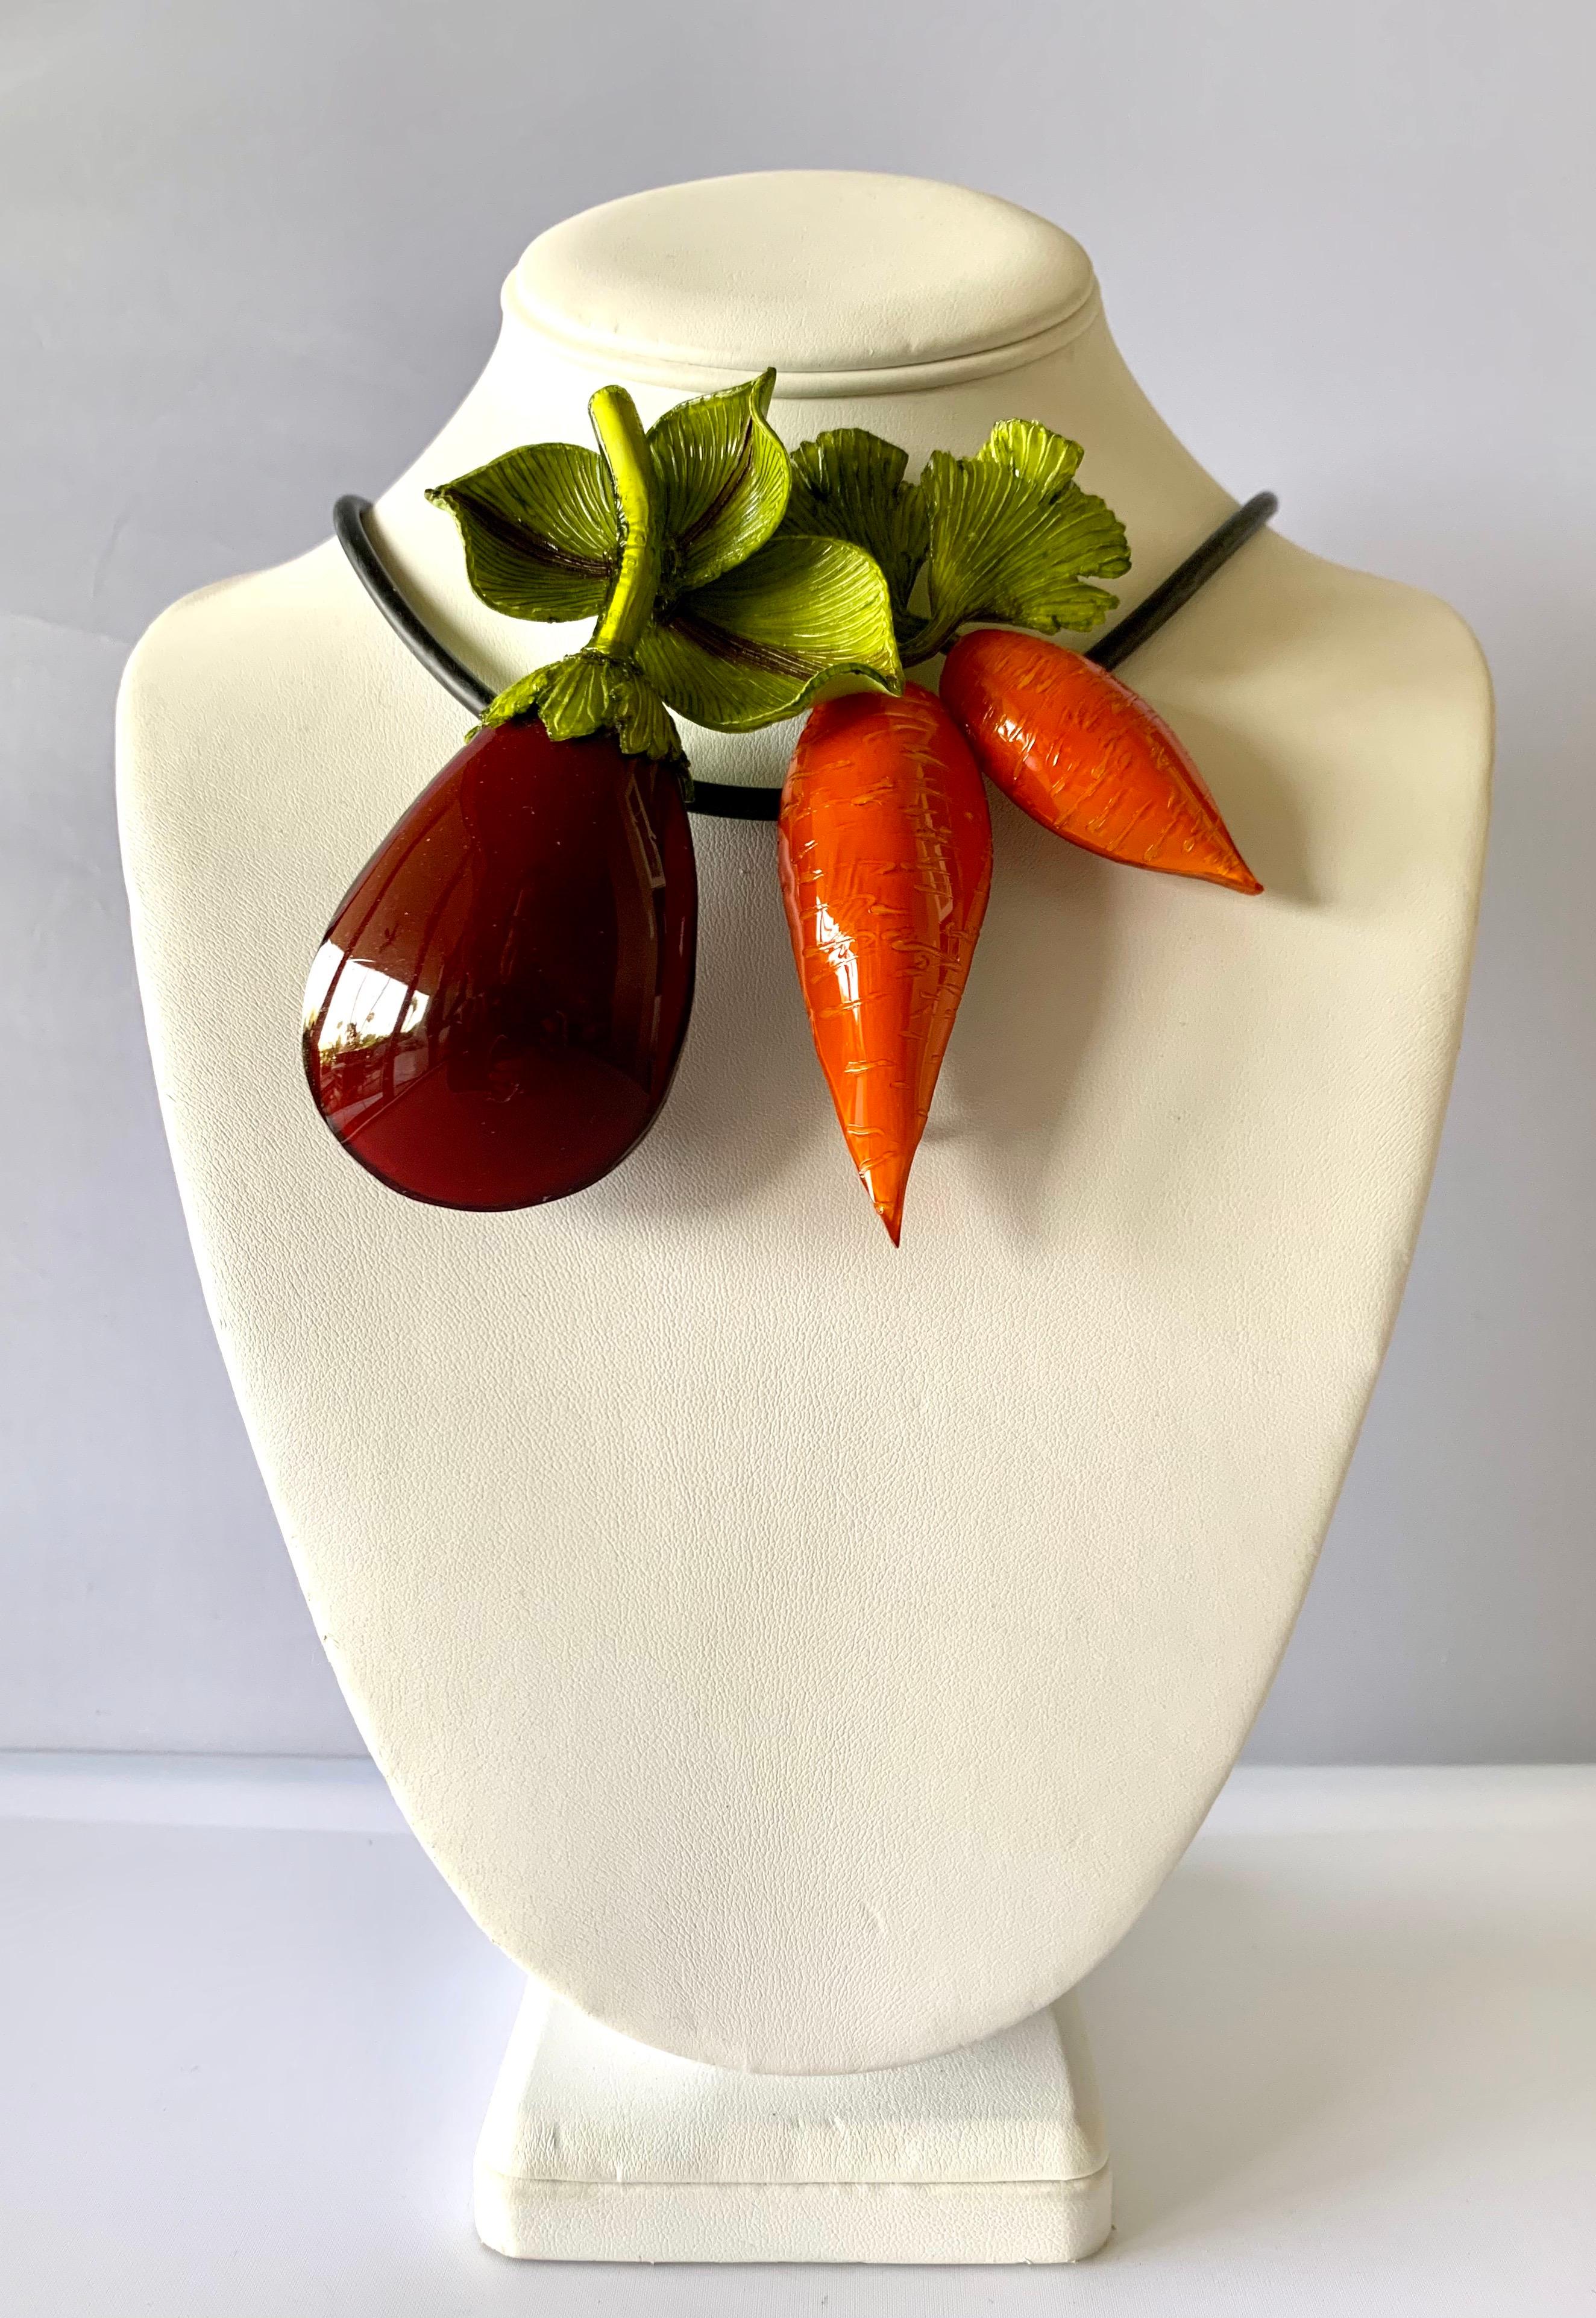 Contemporary French designer fruit and vegetable statement necklace - the statement necklace is comprised out of a black rubber cord that is embellished by carrots, and an eggplant. The piece can be worn as a necklace or the items individually as